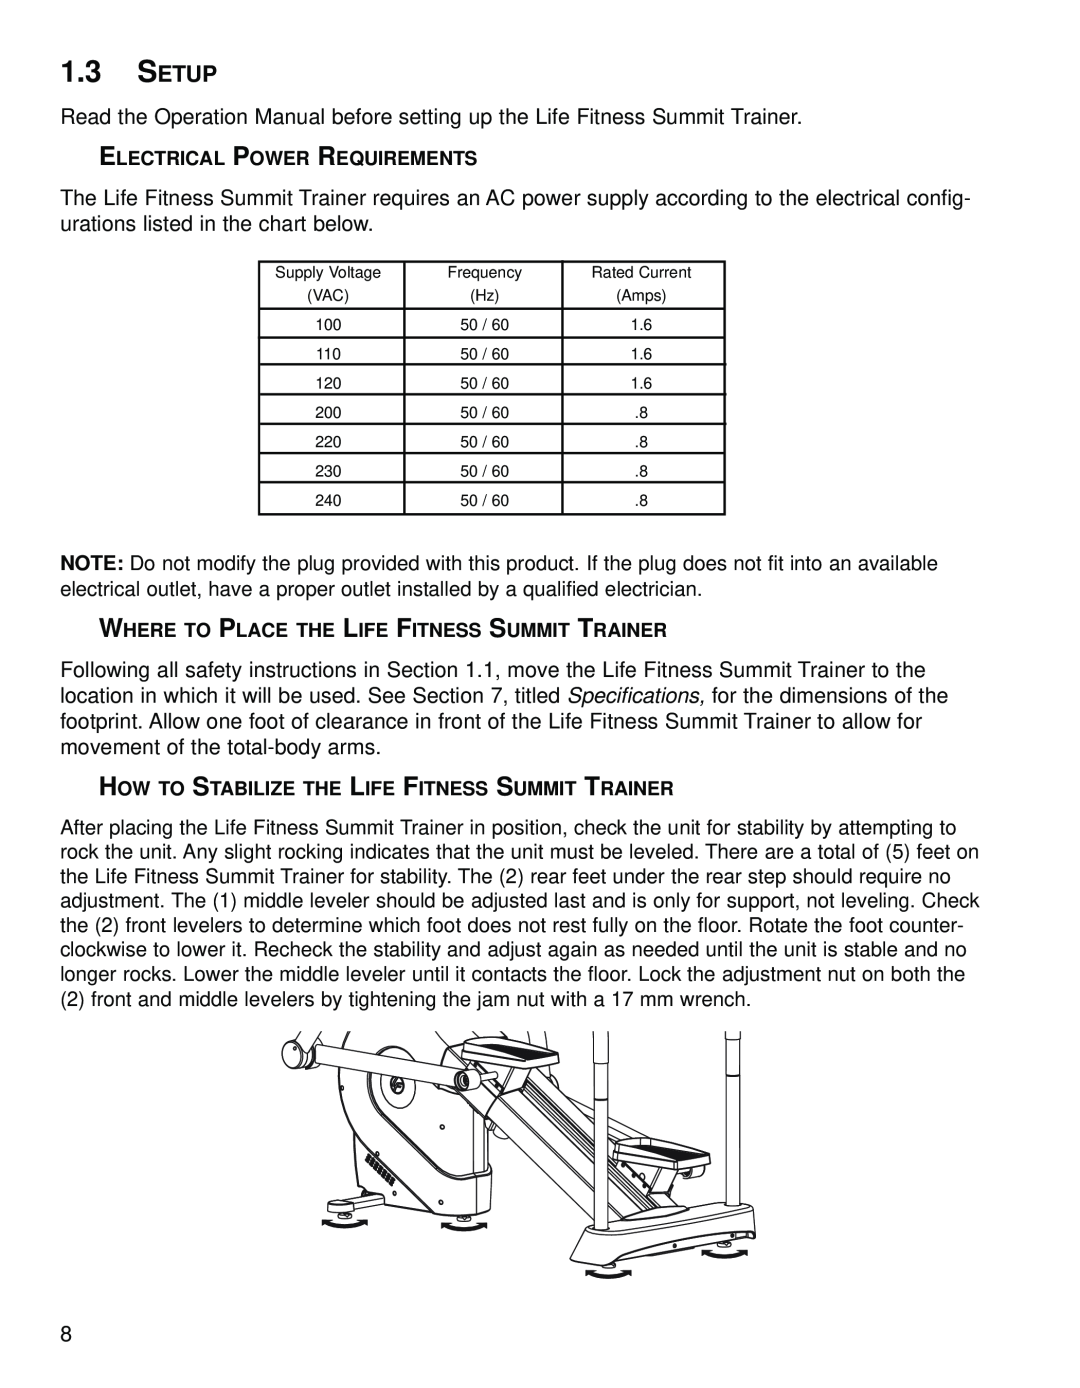 Life Fitness 95Le operation manual Setup, Electrical Power Requirements, Where To Place The Life Fitness Summit Trainer 